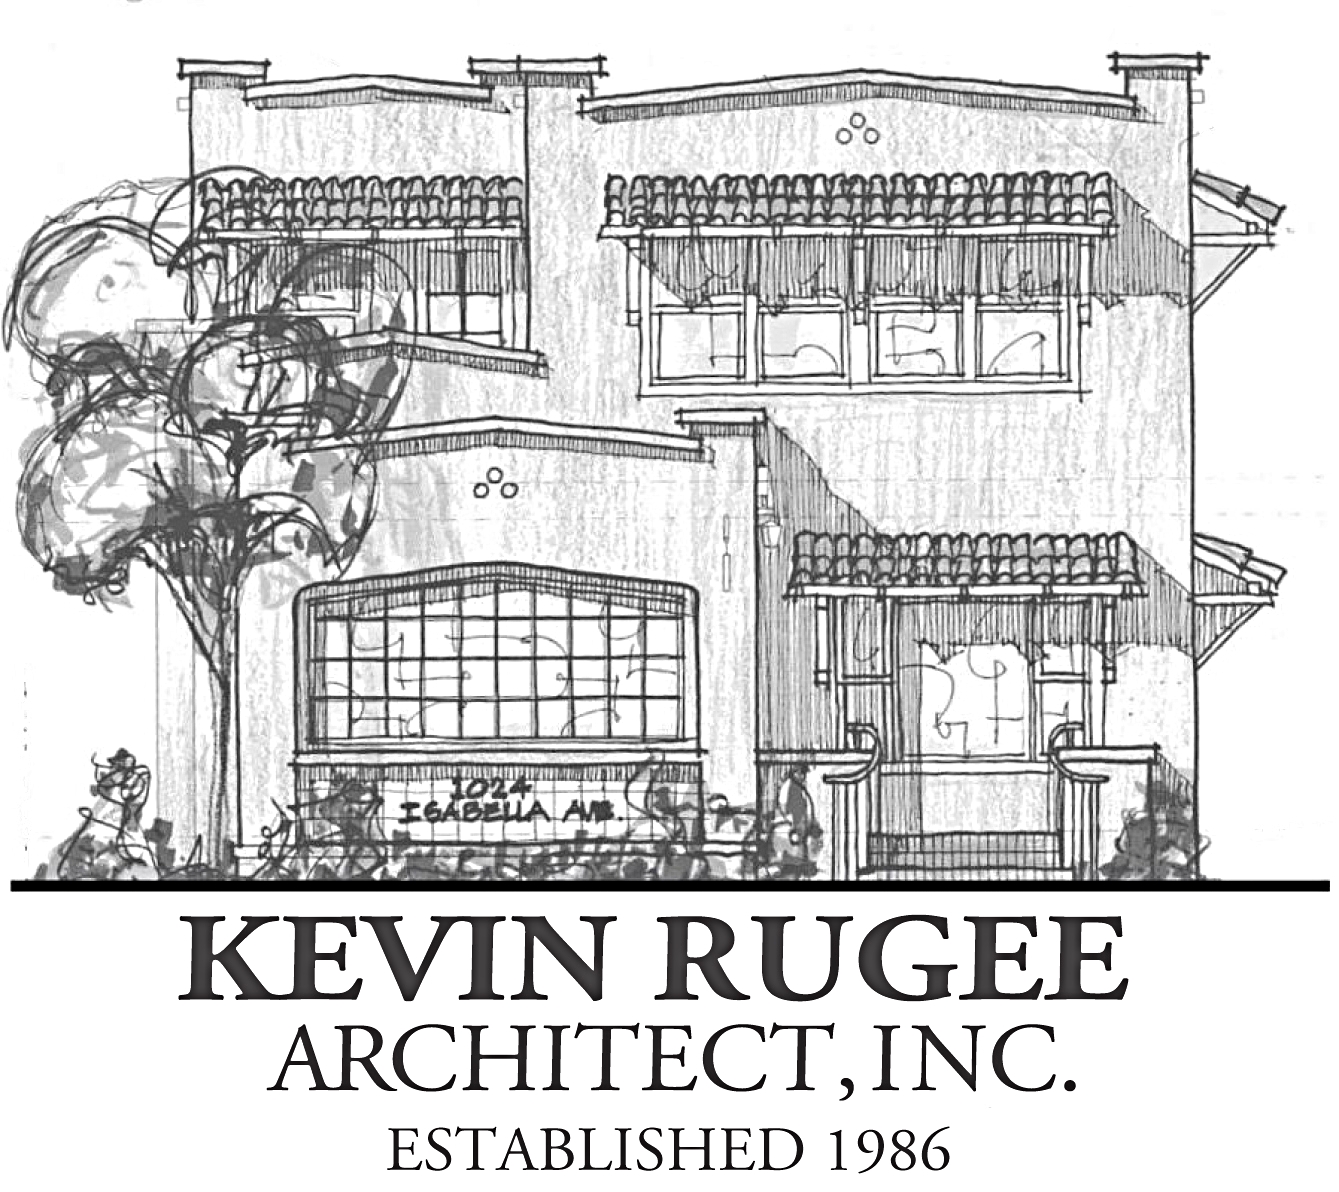 Kevin Rugee Architect, Inc.